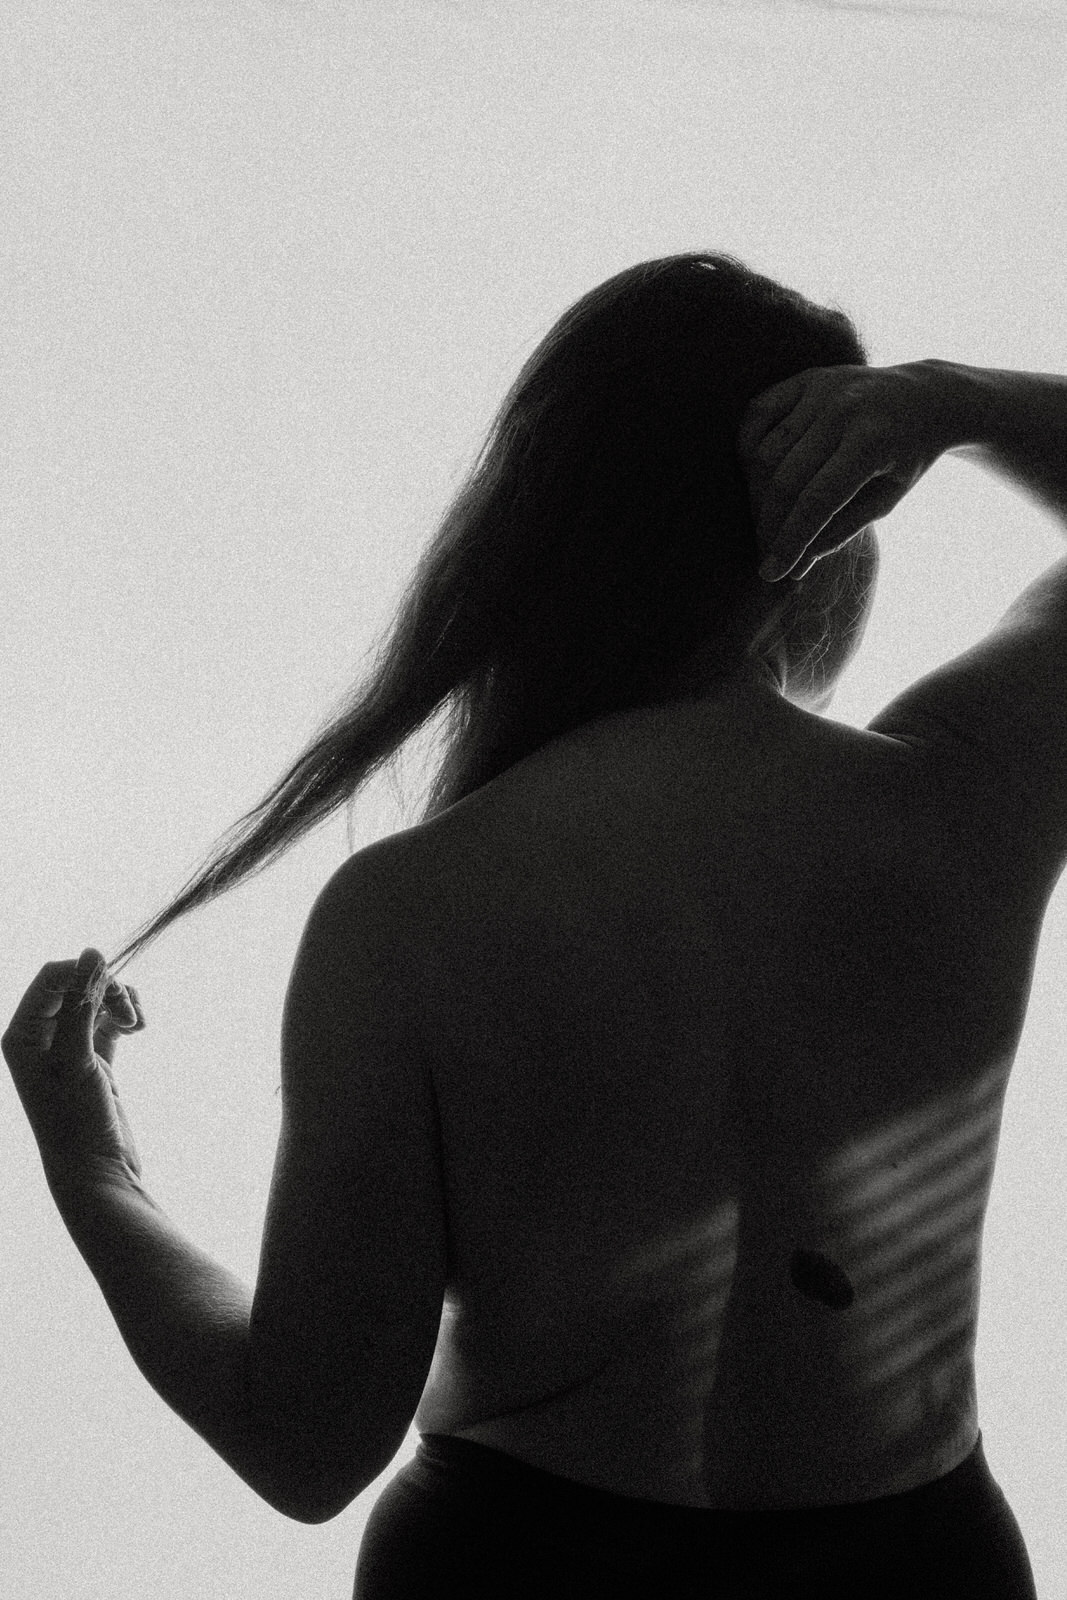 fine art nude image of woman's back and hands holding hair